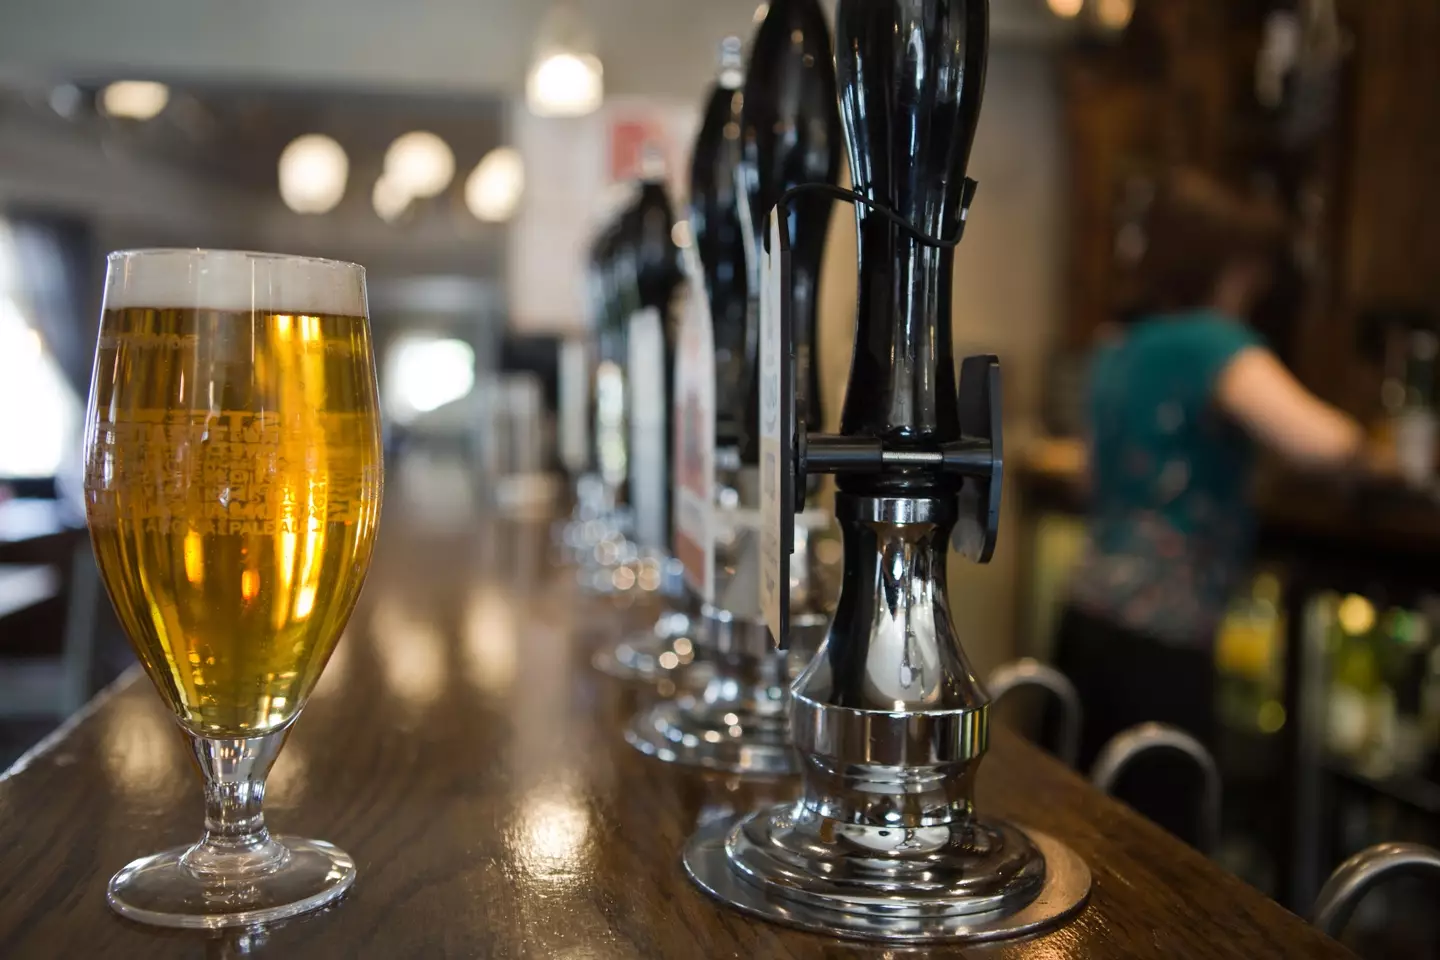 A man got the shock of his life when he was charged over £55,000 for a pint.